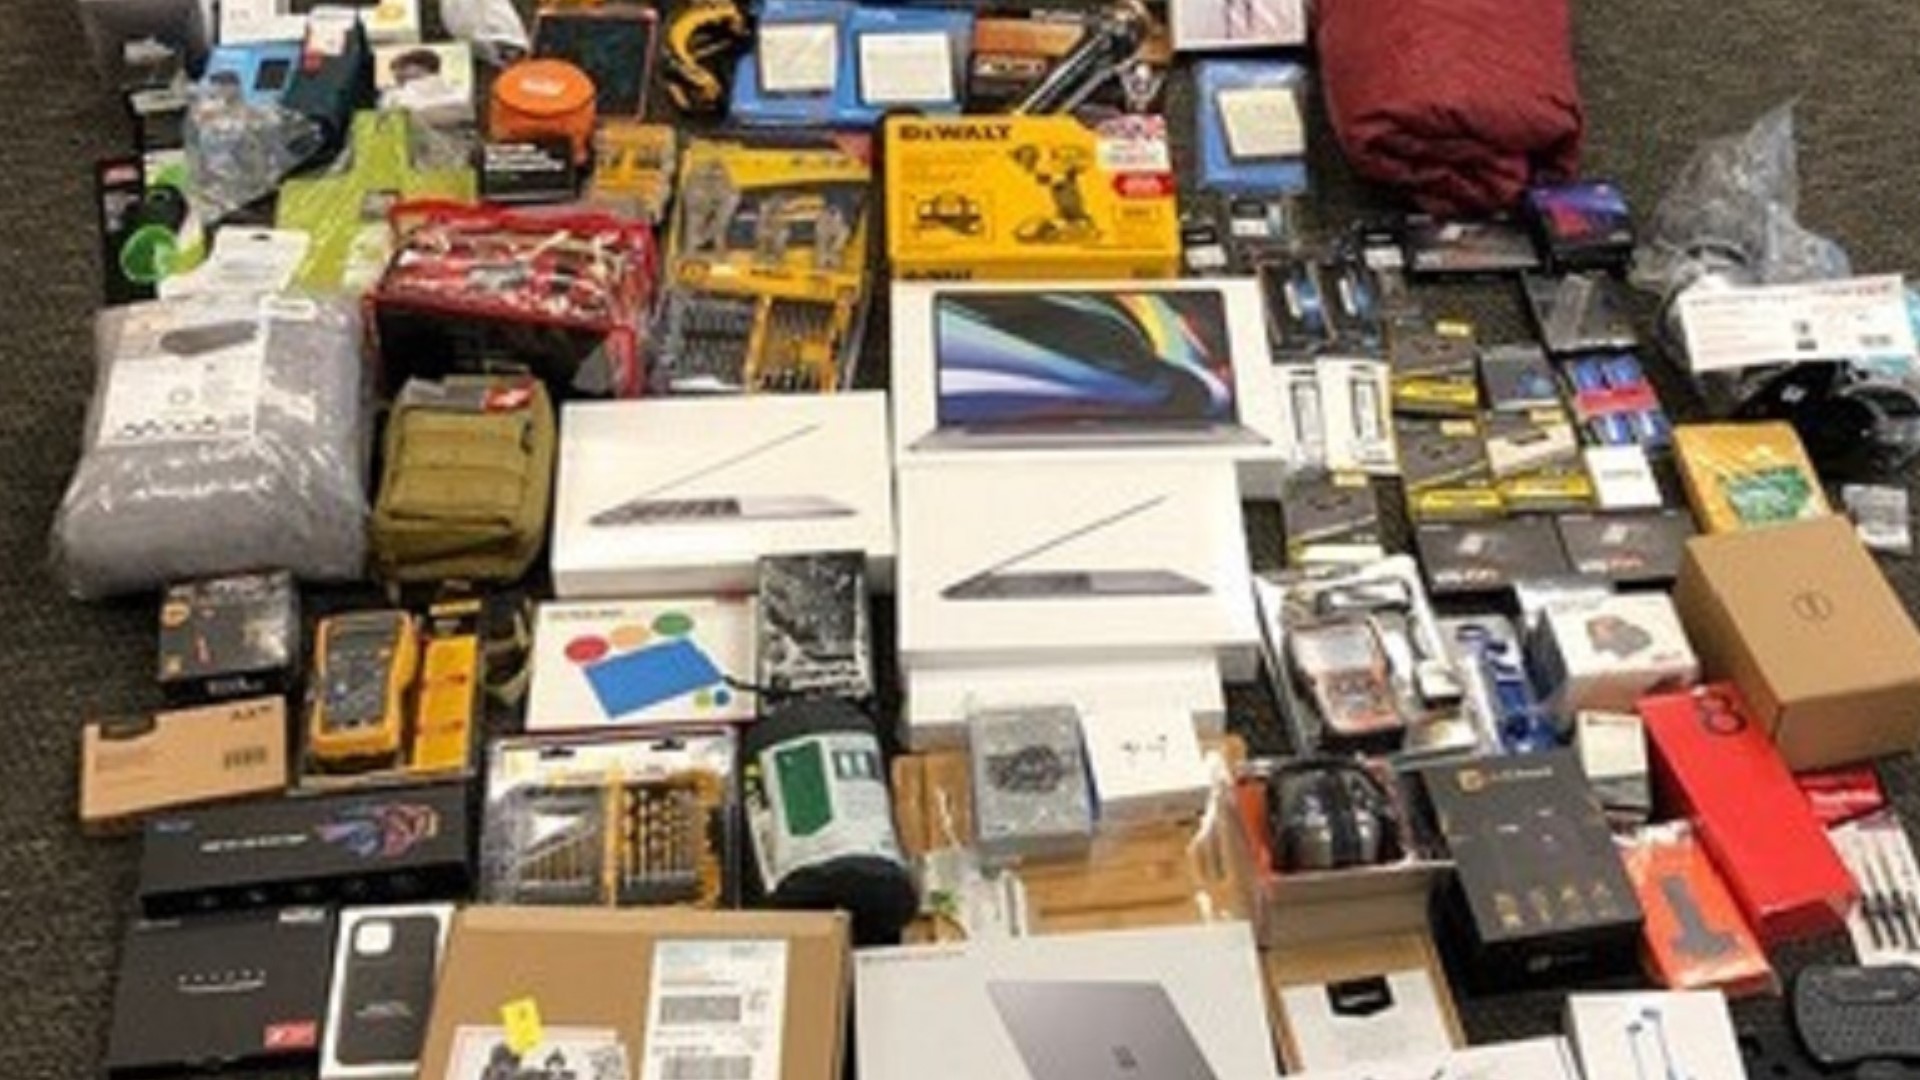 The loss prevention team for Amazon say they noticed an employee concealing an Apple MacBook while walking to his car, Sacramento County Sheriff's officials said.